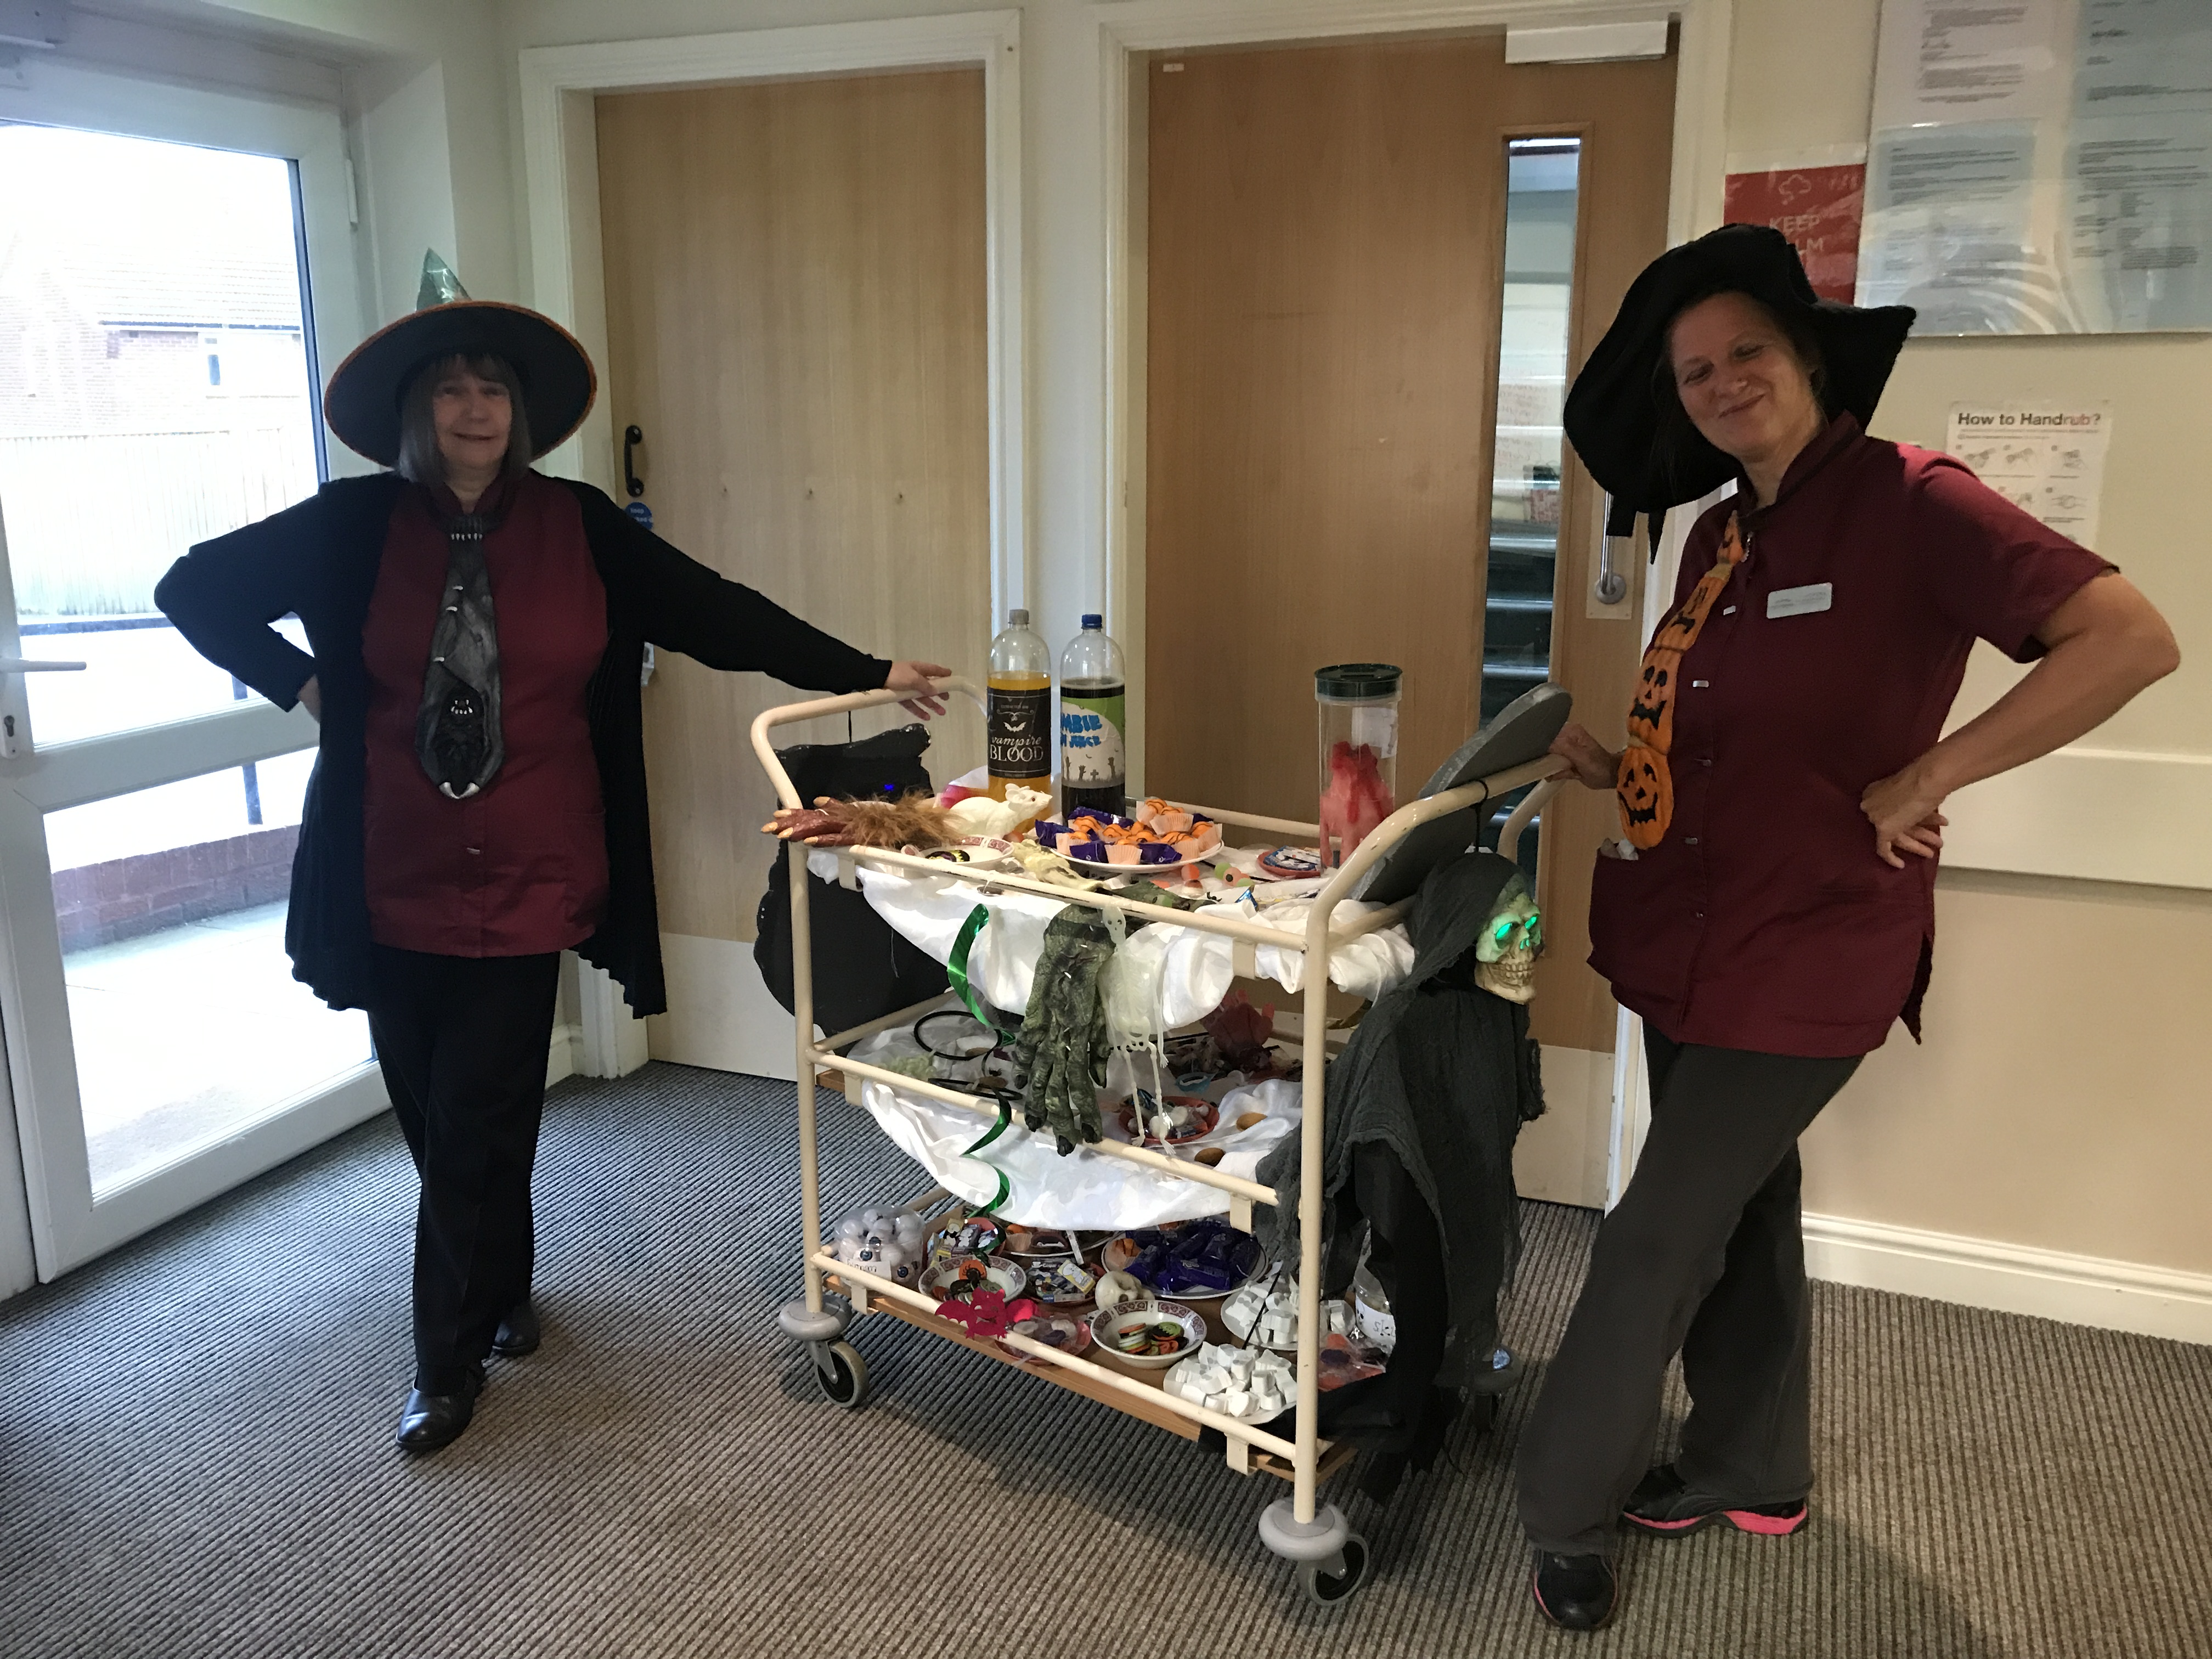 Spooky Trolley does its rounds at Four Seasons Care Centre on Halloween: Key Healthcare is dedicated to caring for elderly residents in safe. We have multiple dementia care homes including our care home middlesbrough, our care home St. Helen and care home saltburn. We excel in monitoring and improving care levels.